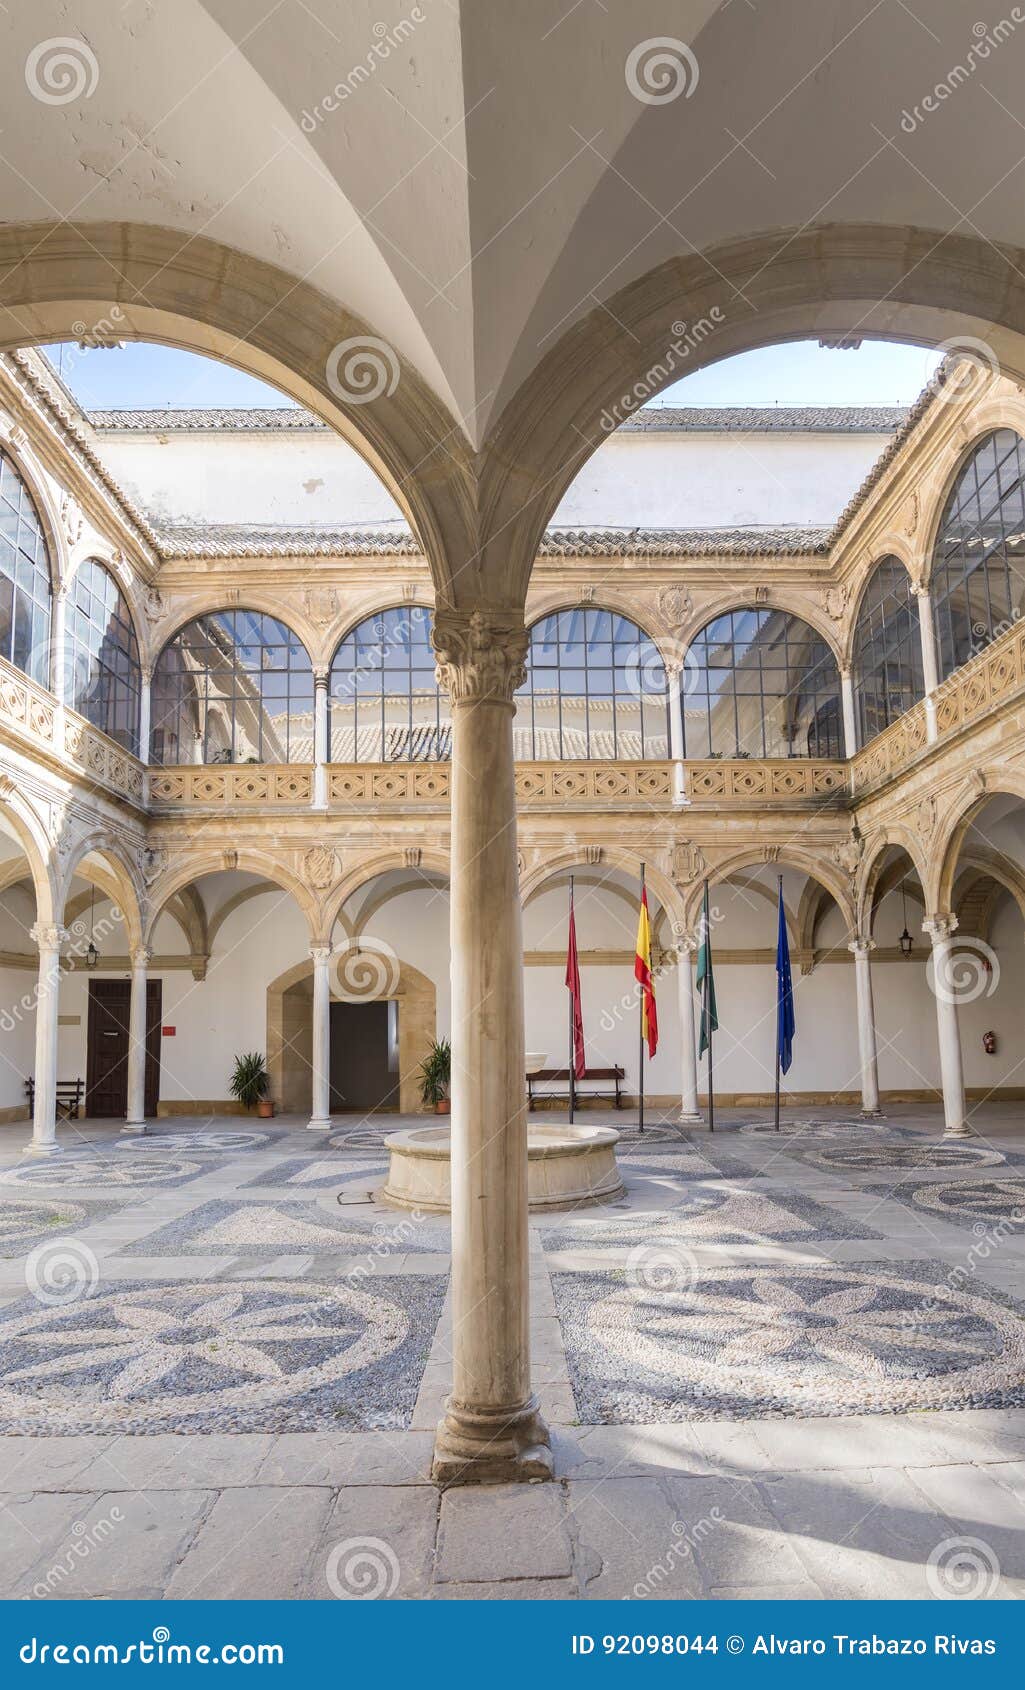 vazquez de molina palace palace of the chains courtyard, ubeda